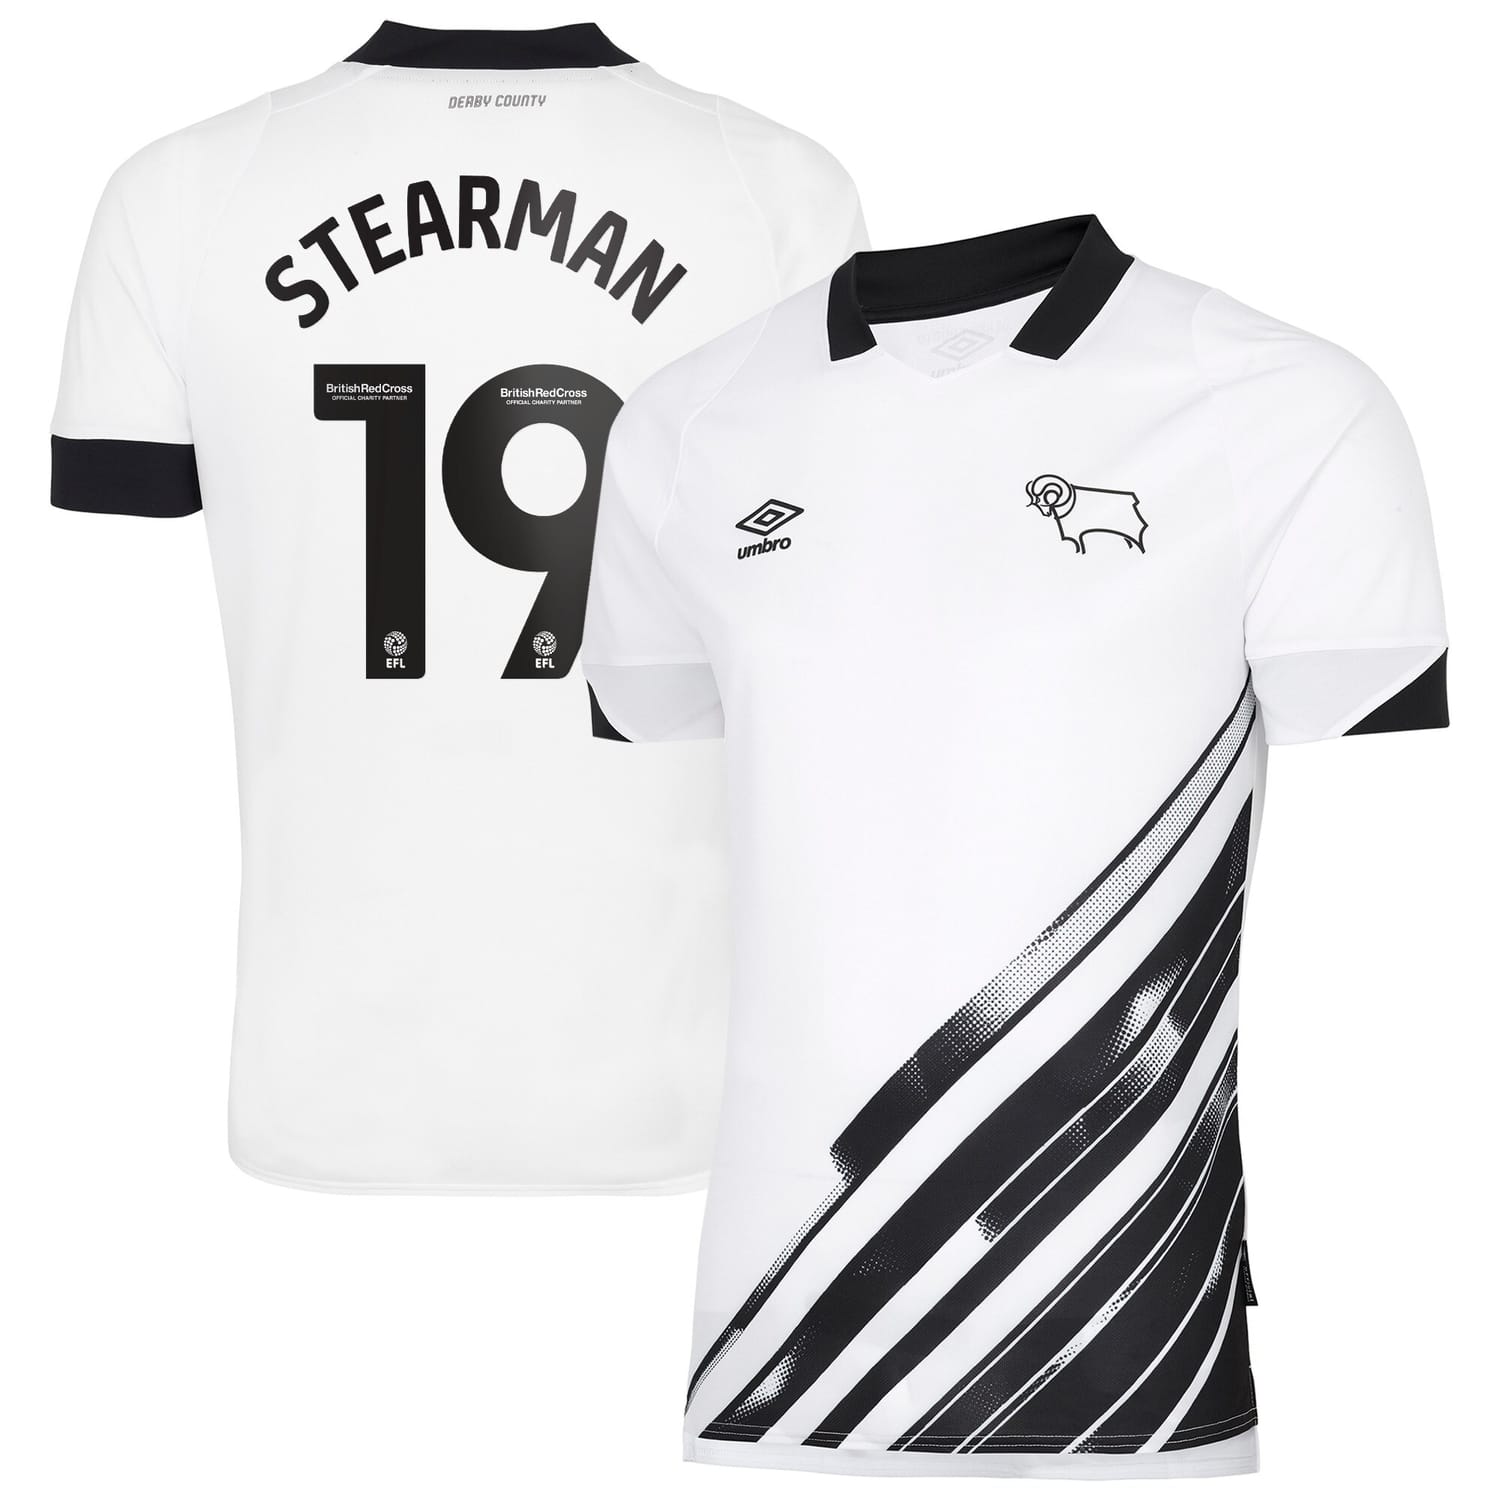 EFL League One Derby County Home Jersey Shirt 2022-23 player Stearman 19 printing for Men